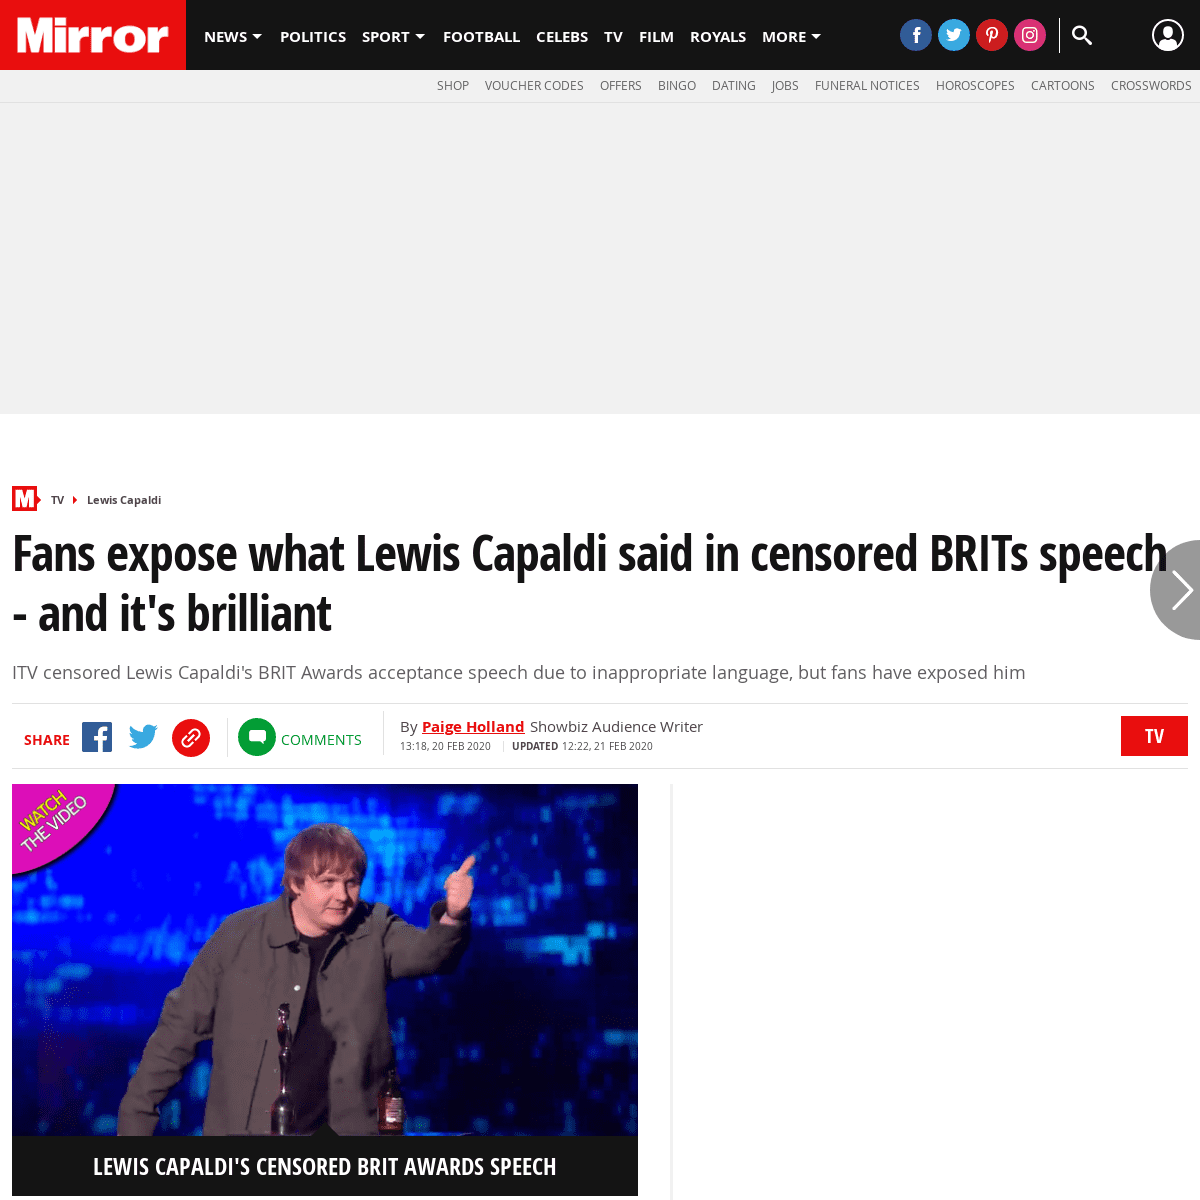 A complete backup of www.mirror.co.uk/tv/fans-expose-what-lewis-capaldi-21536906